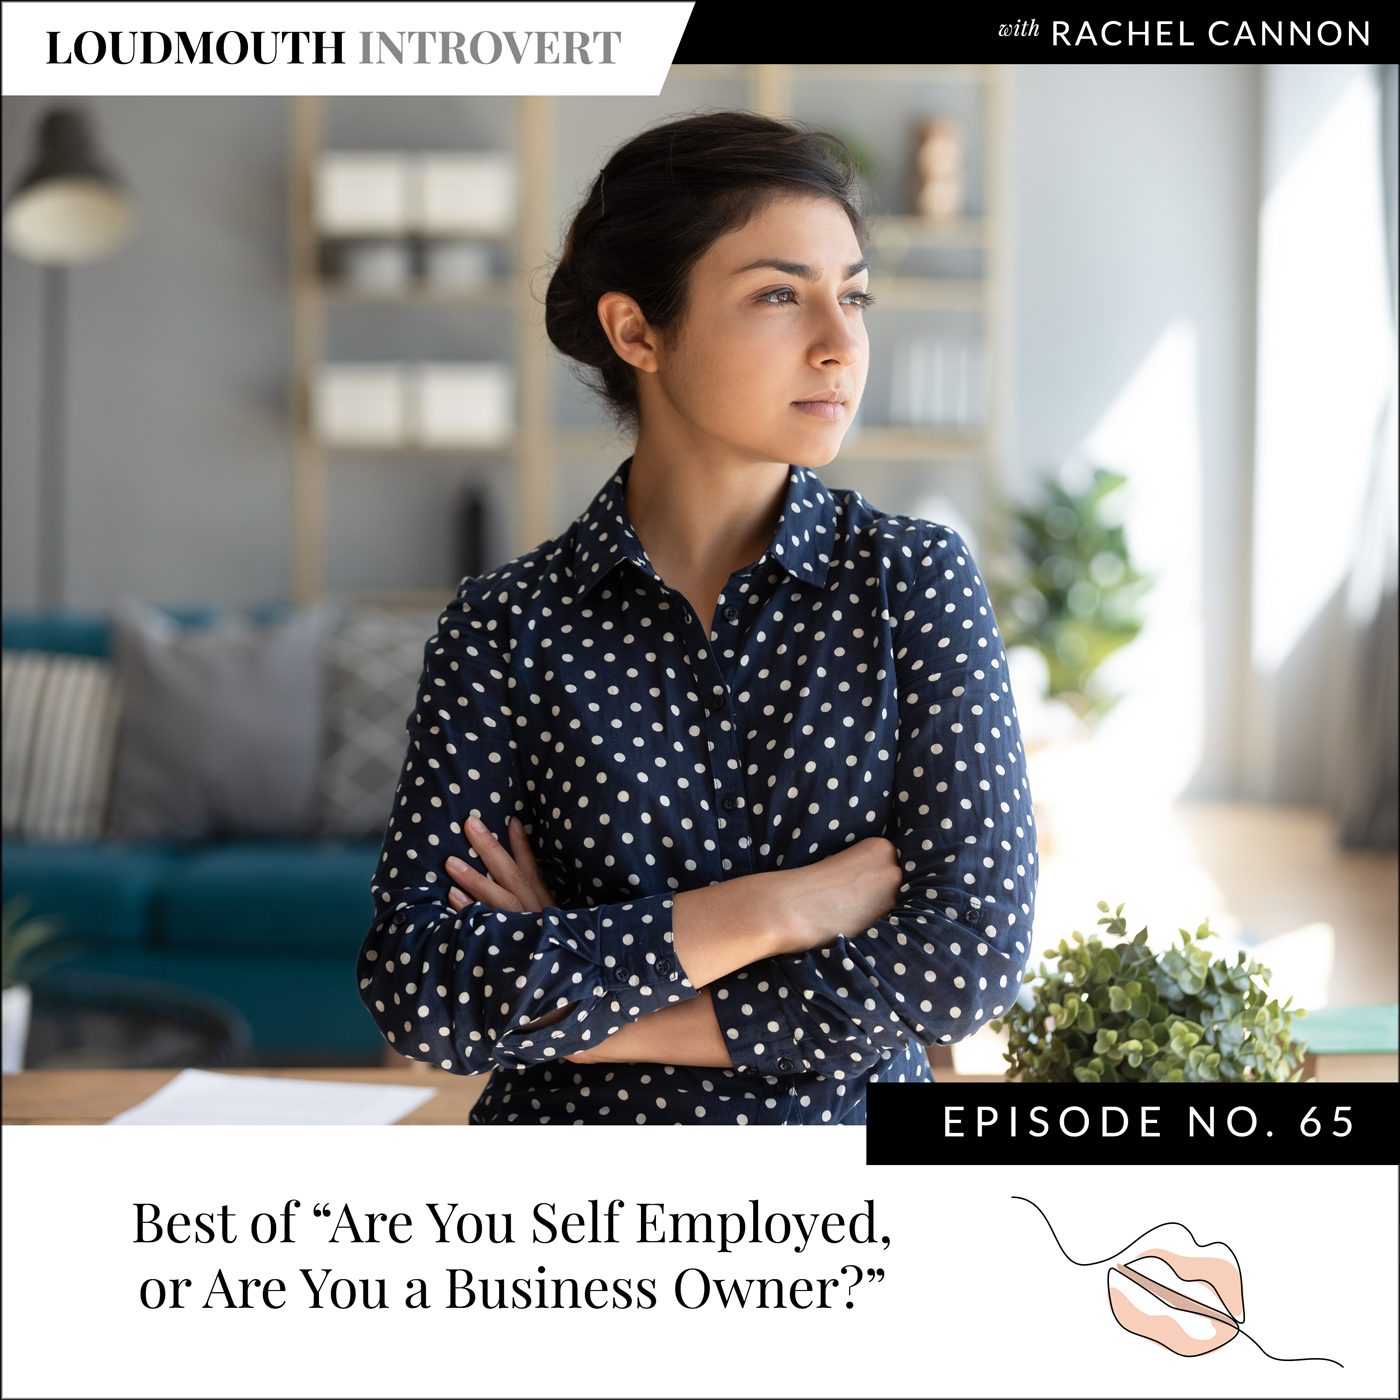 Best of “Are You Self Employed, or Are You a Business Owner?”